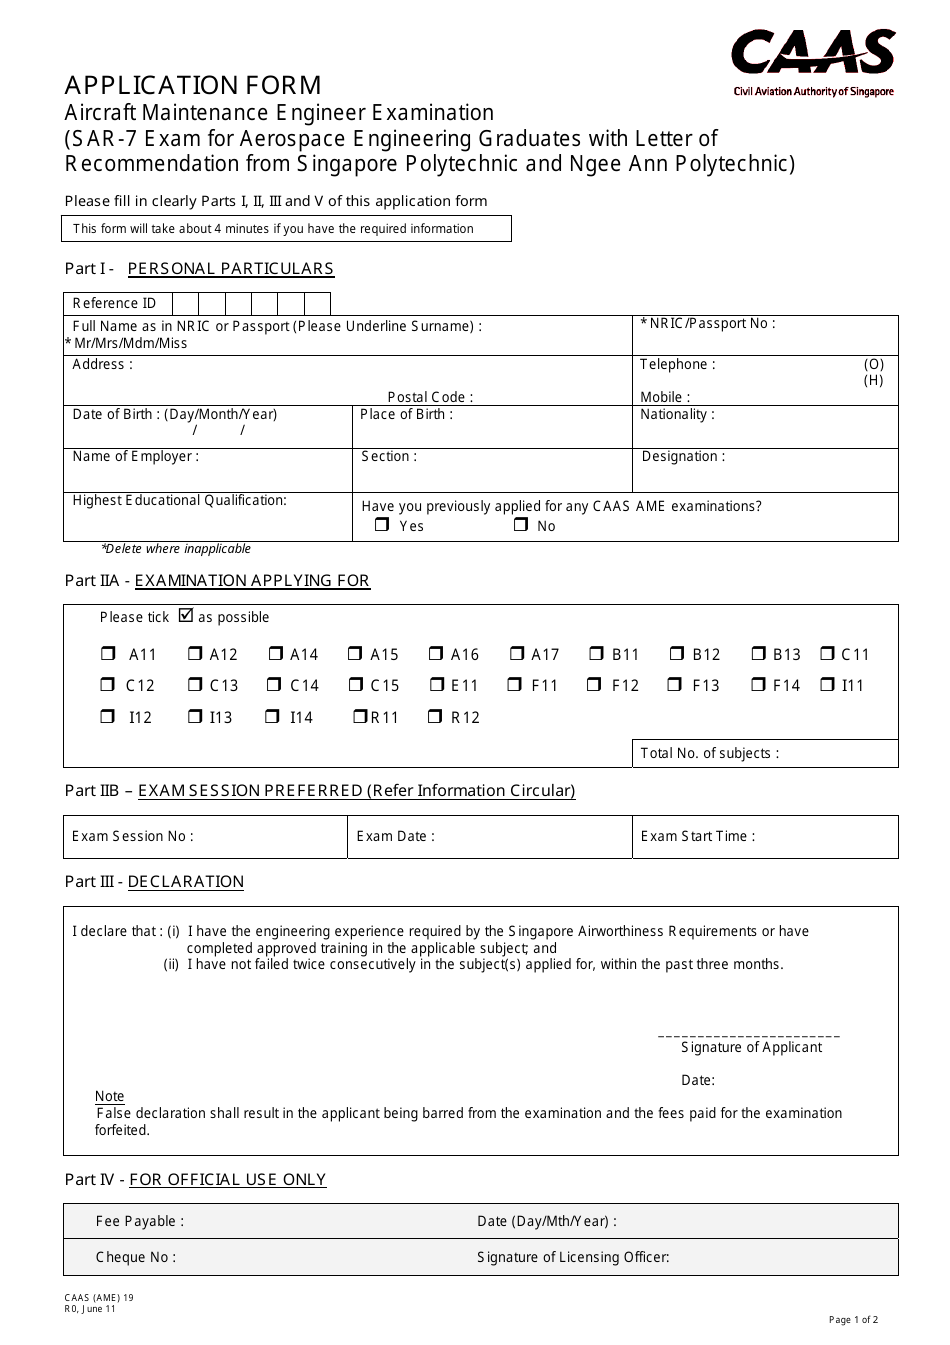 Form CAAS (AME)19 Application Form for Aircraft Maintenance Engineer Examination - Singapore, Page 1